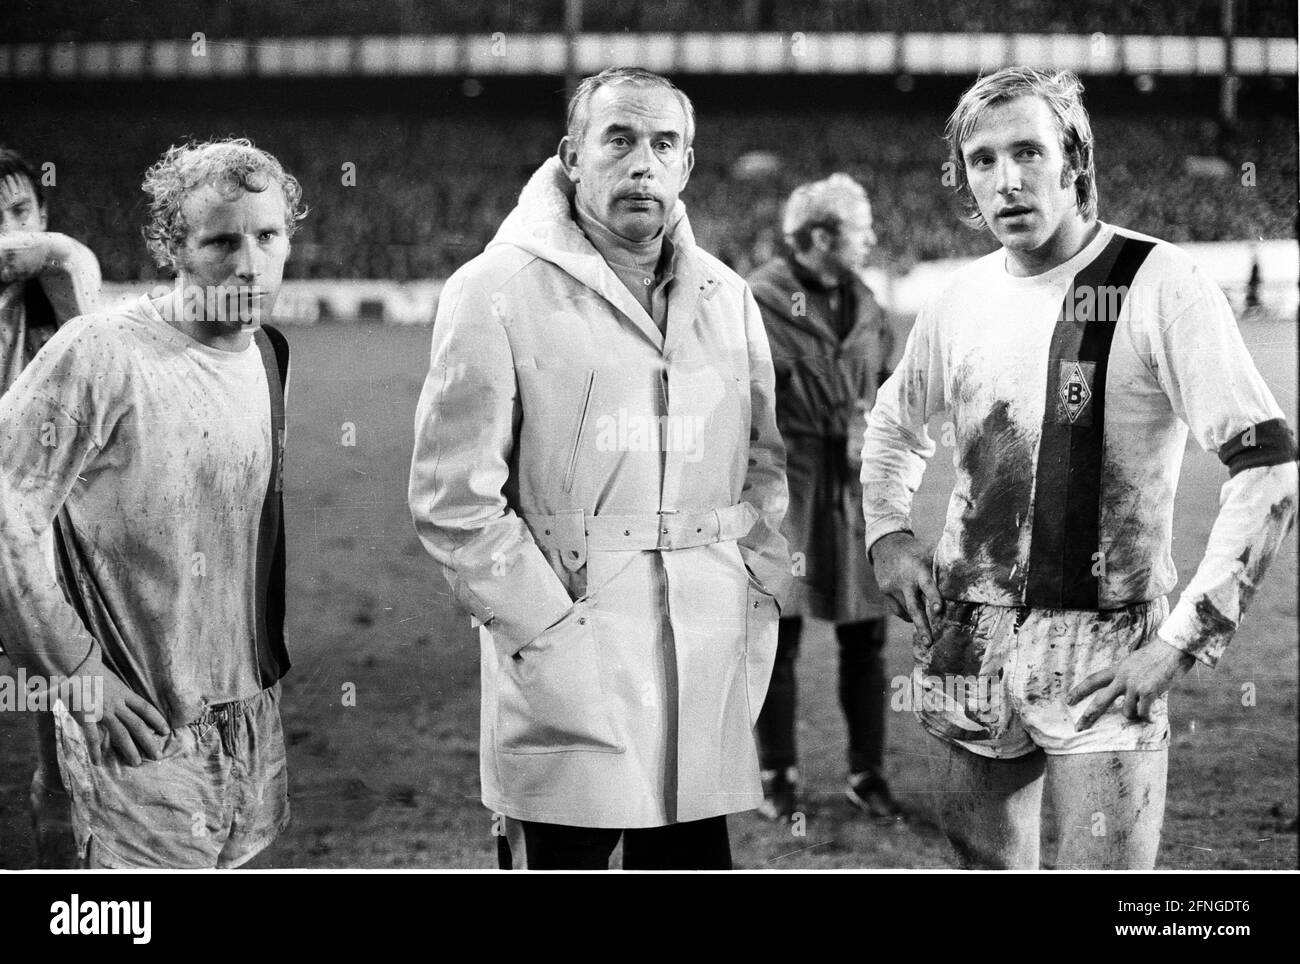 European Champion Clubs' Cup 1970/71. FC Everton - Borussia Mönchengladbach 04.11.1970 5:4 n.E. Tr. Hennes Weisweiler (BMG) with players during the extra-time break. Coach Hennes Weisweiler with Berti Vogts (left) and Günter Netzer. For journalistic use only! Only for editorial use! [automated translation] Stock Photo